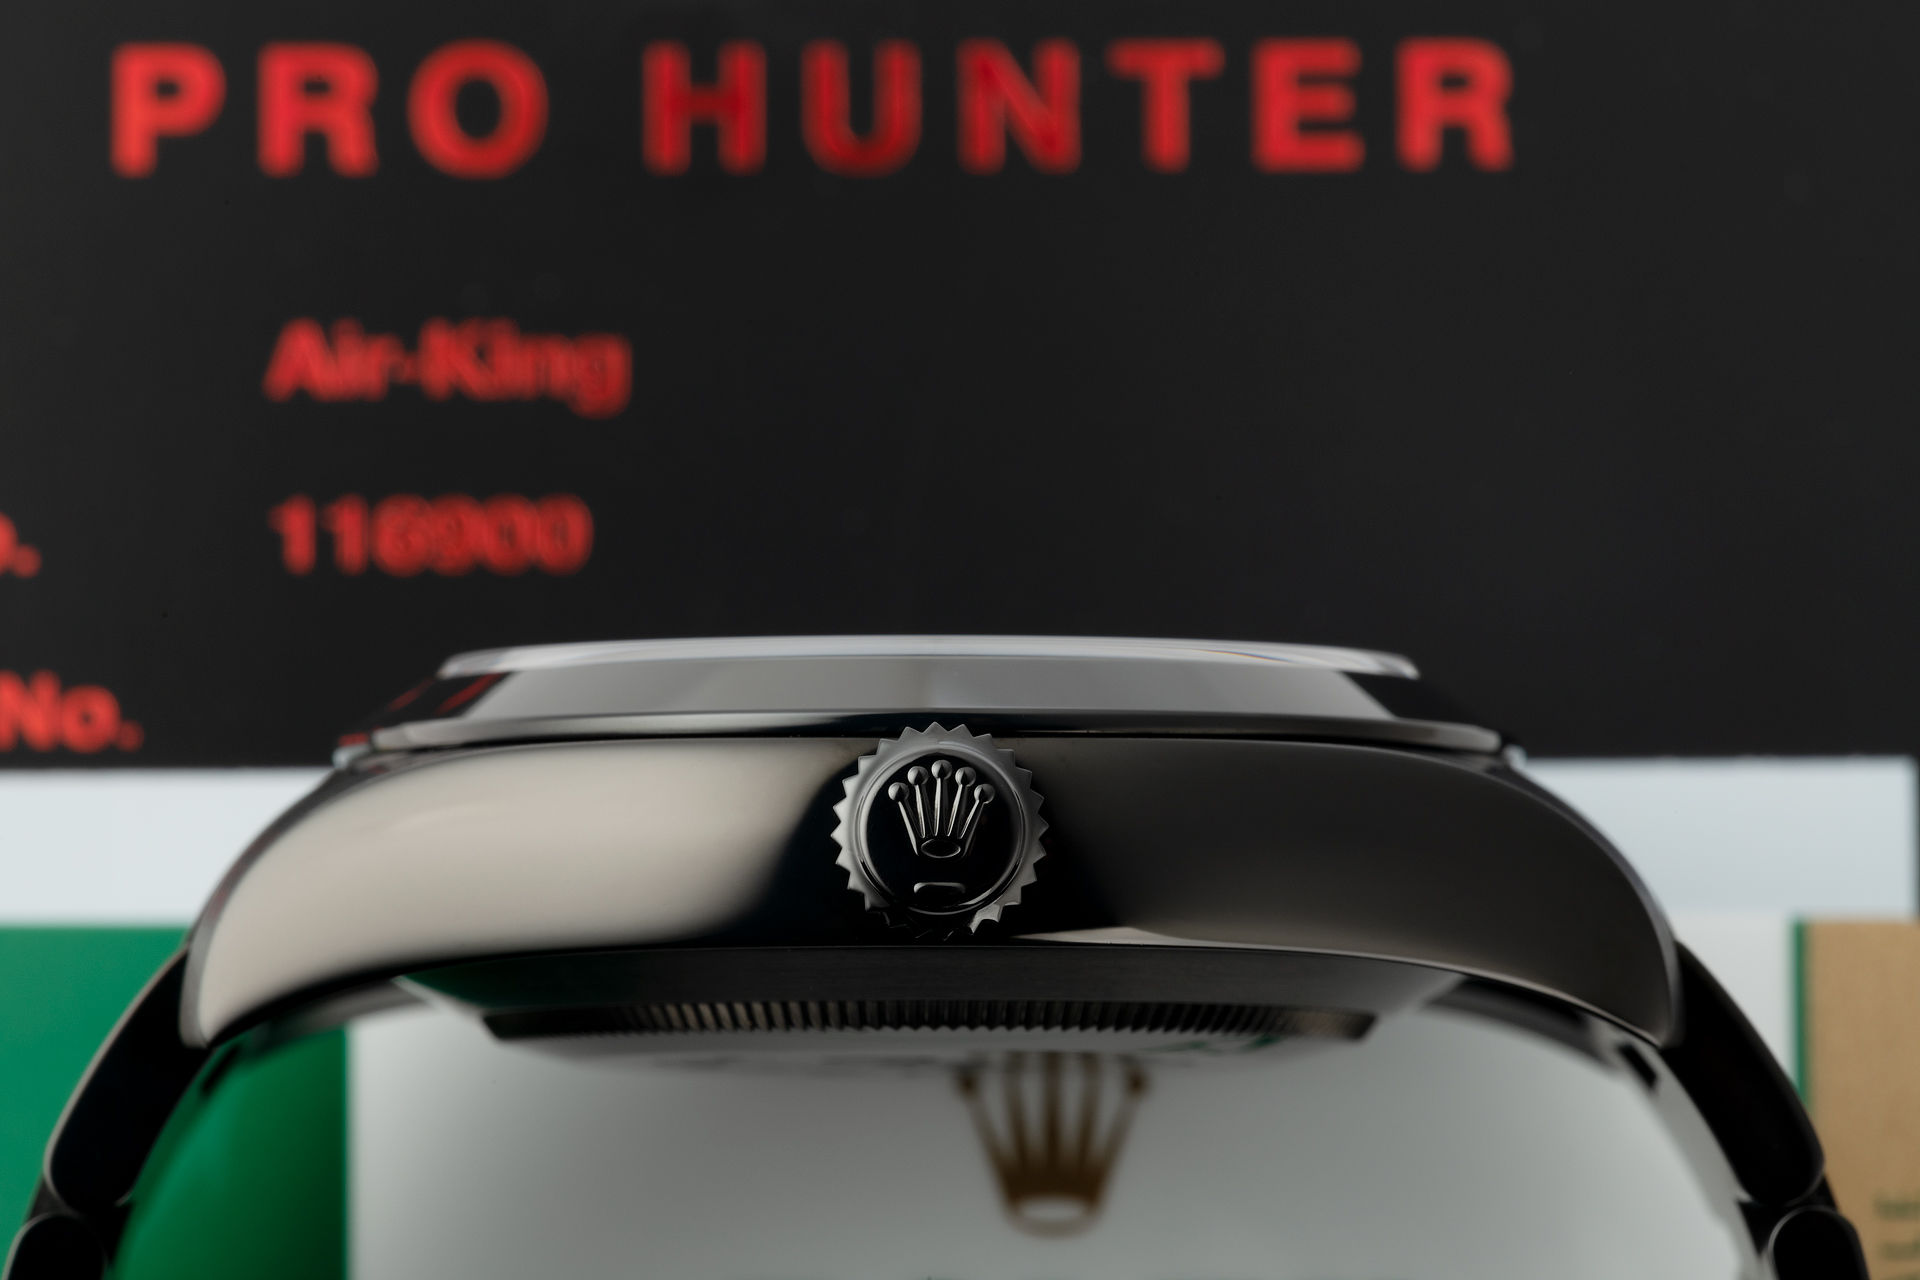 ref 116900 | One of 100 'Limited Edition' | Pro Hunter Air-King